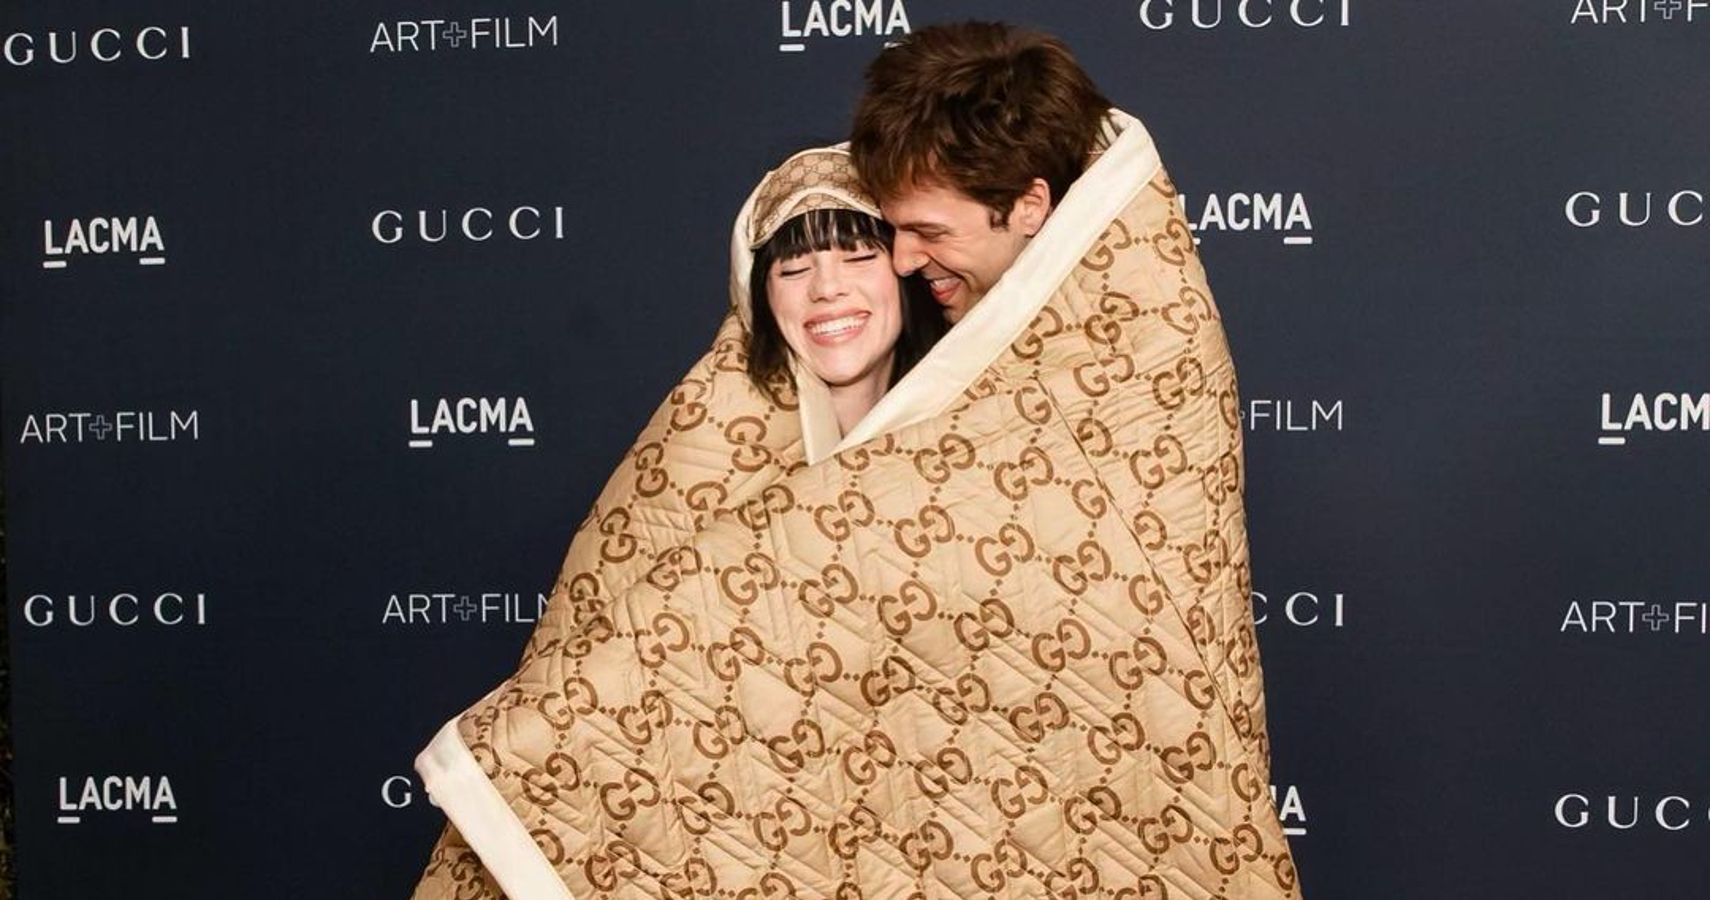 Billie Eilish and Jesse Rutherford On The Red Carpet Hugging Each Other